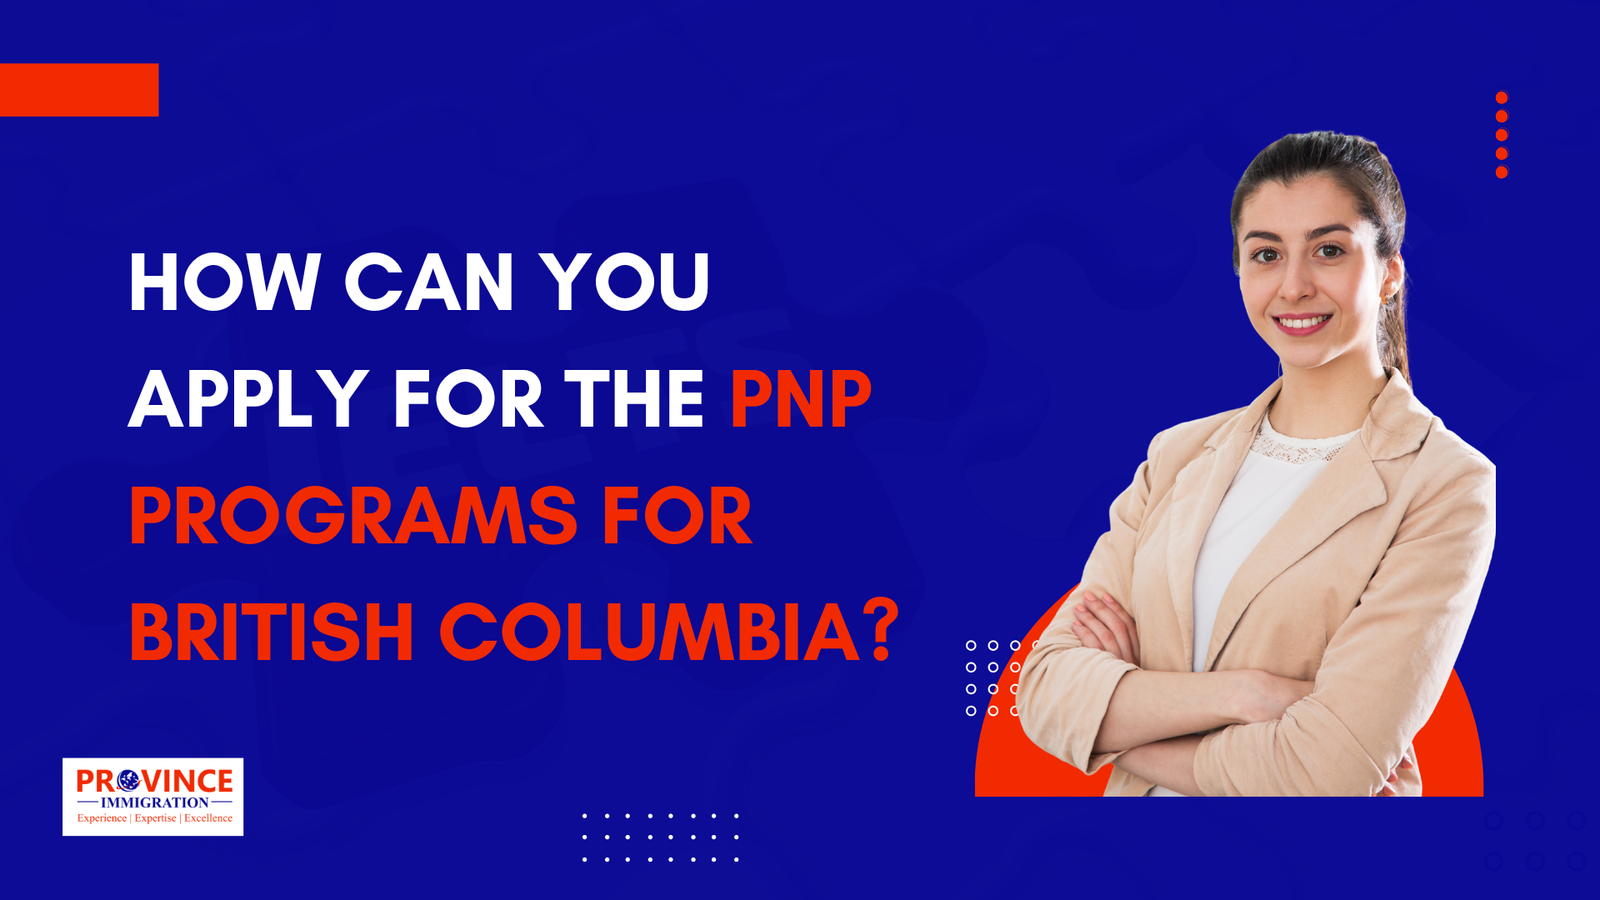 How Can You Apply For The PNP Programs For British Columbia